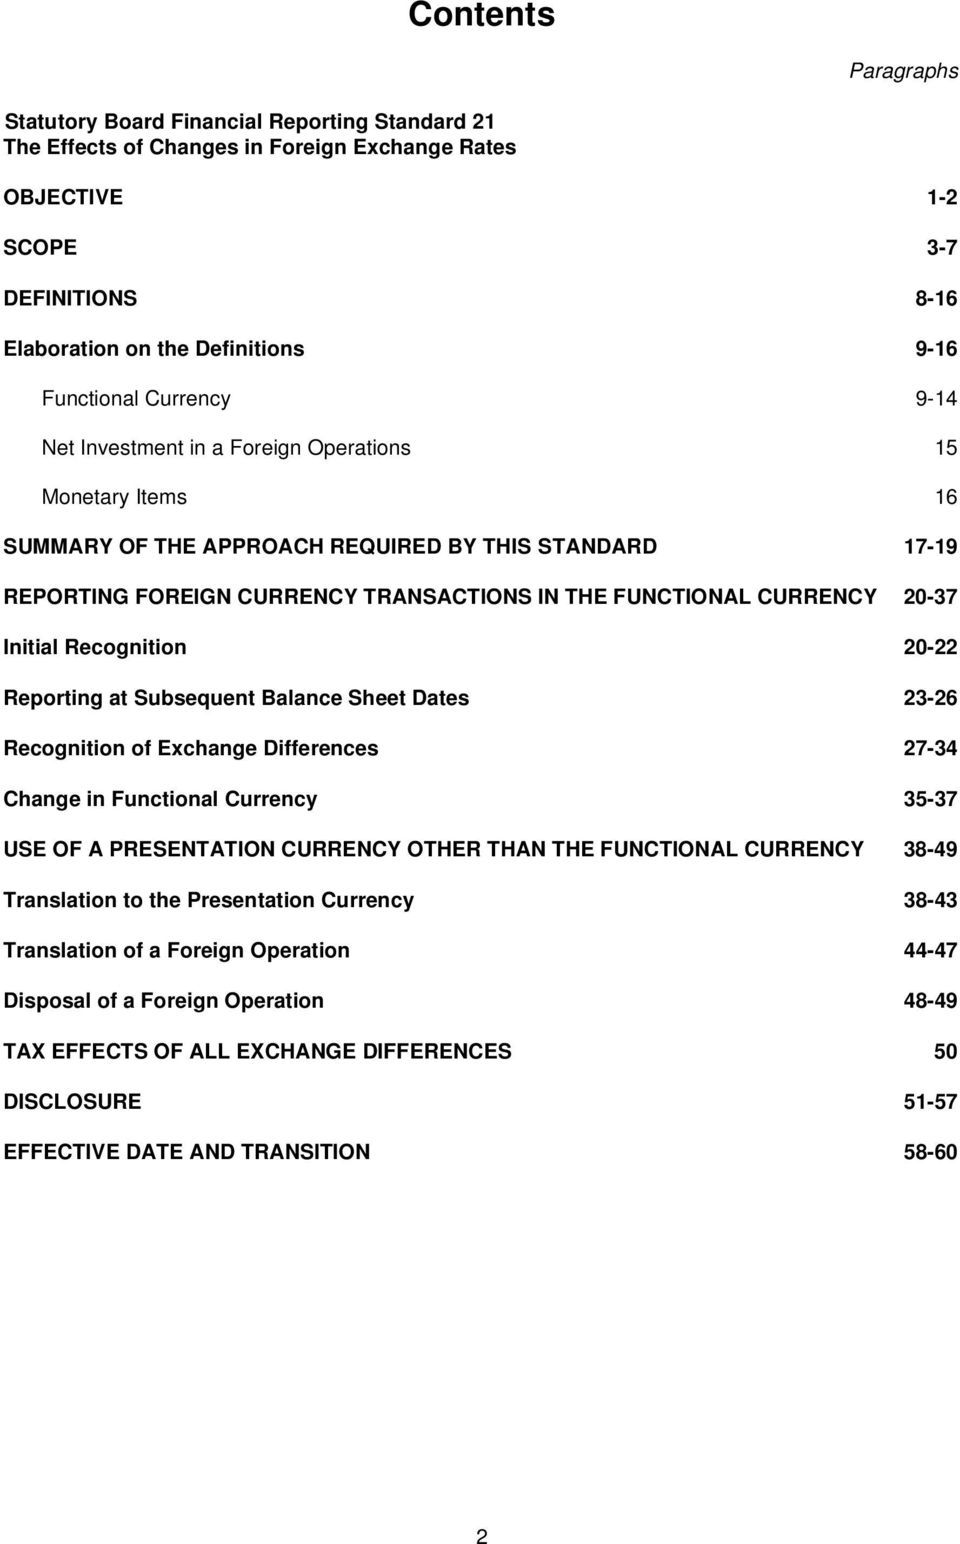 CURRENCY 20-37 Initial Recognition 20-22 Reporting at Subsequent Balance Sheet Dates 23-26 Recognition of Exchange Differences 27-34 Change in Functional Currency 35-37 USE OF A PRESENTATION CURRENCY